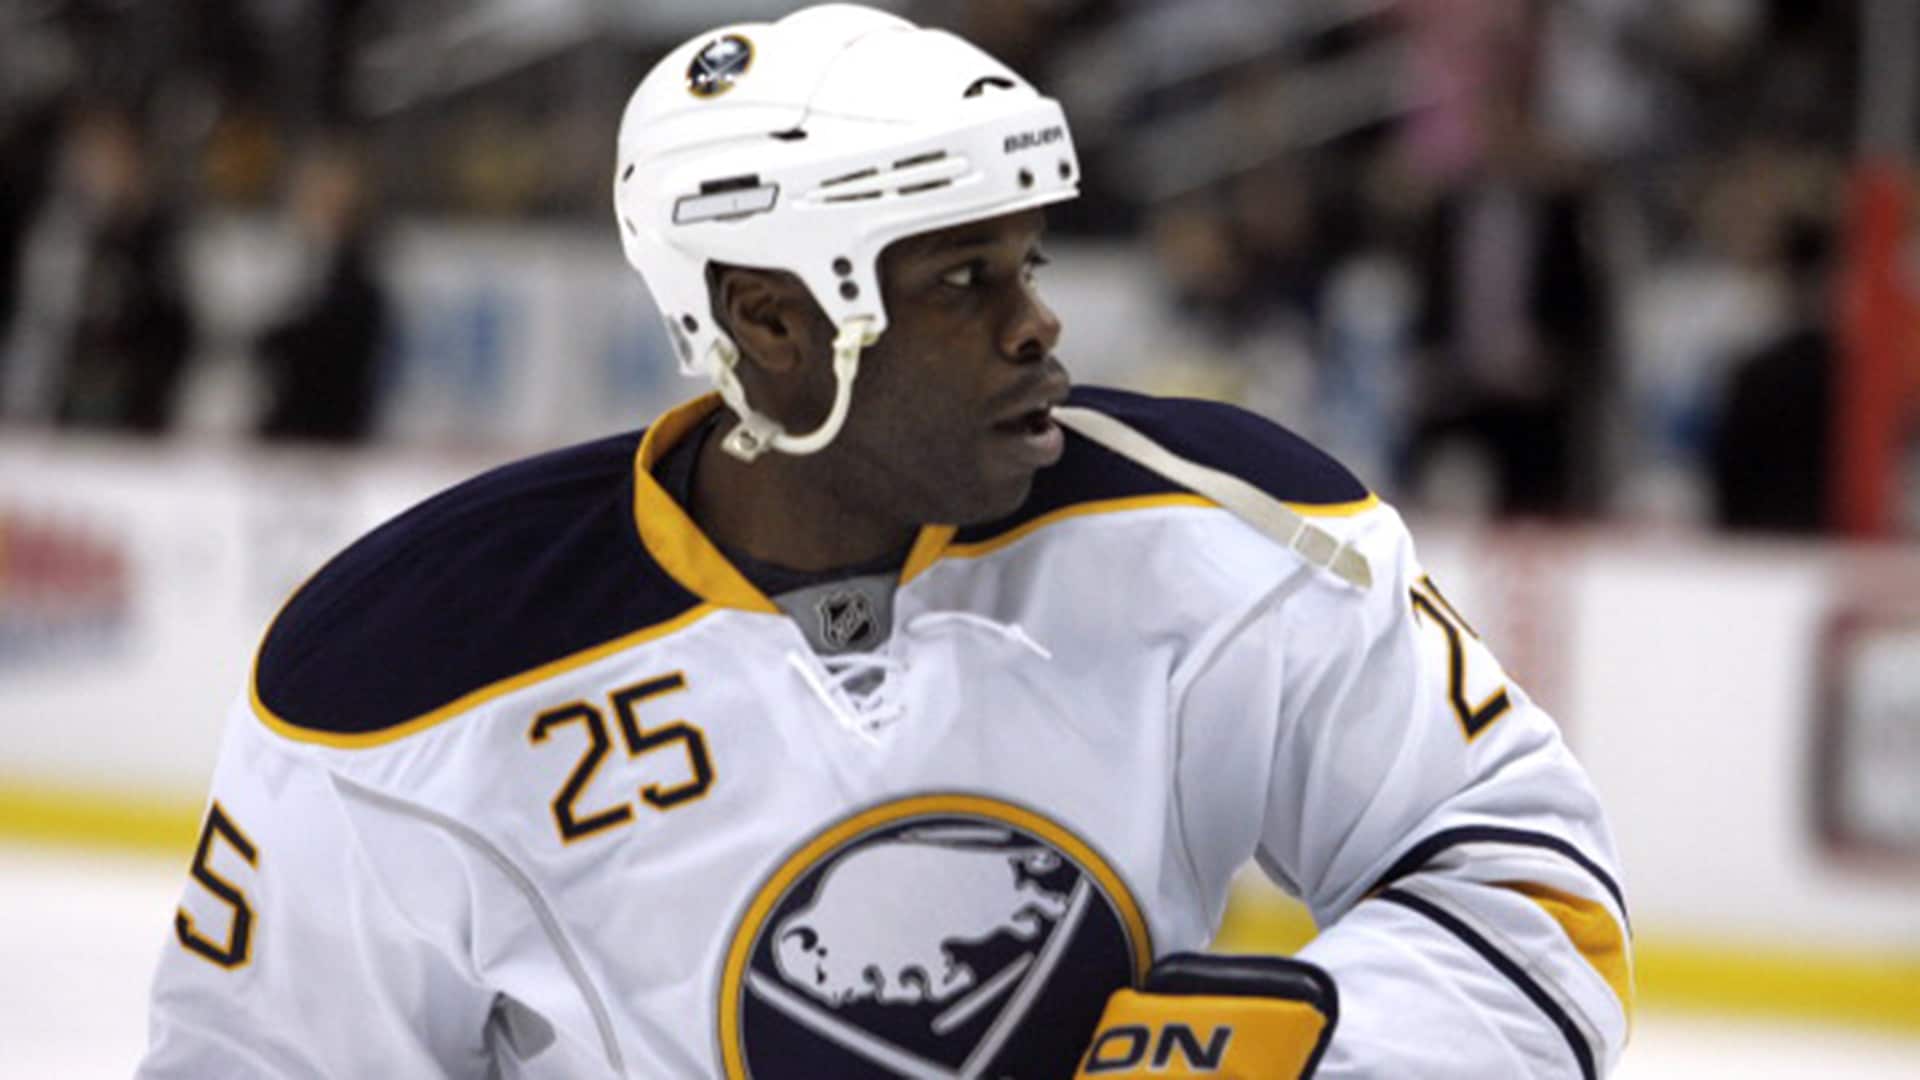 Sabres connection helps Mike Grier make history as first Black NHL